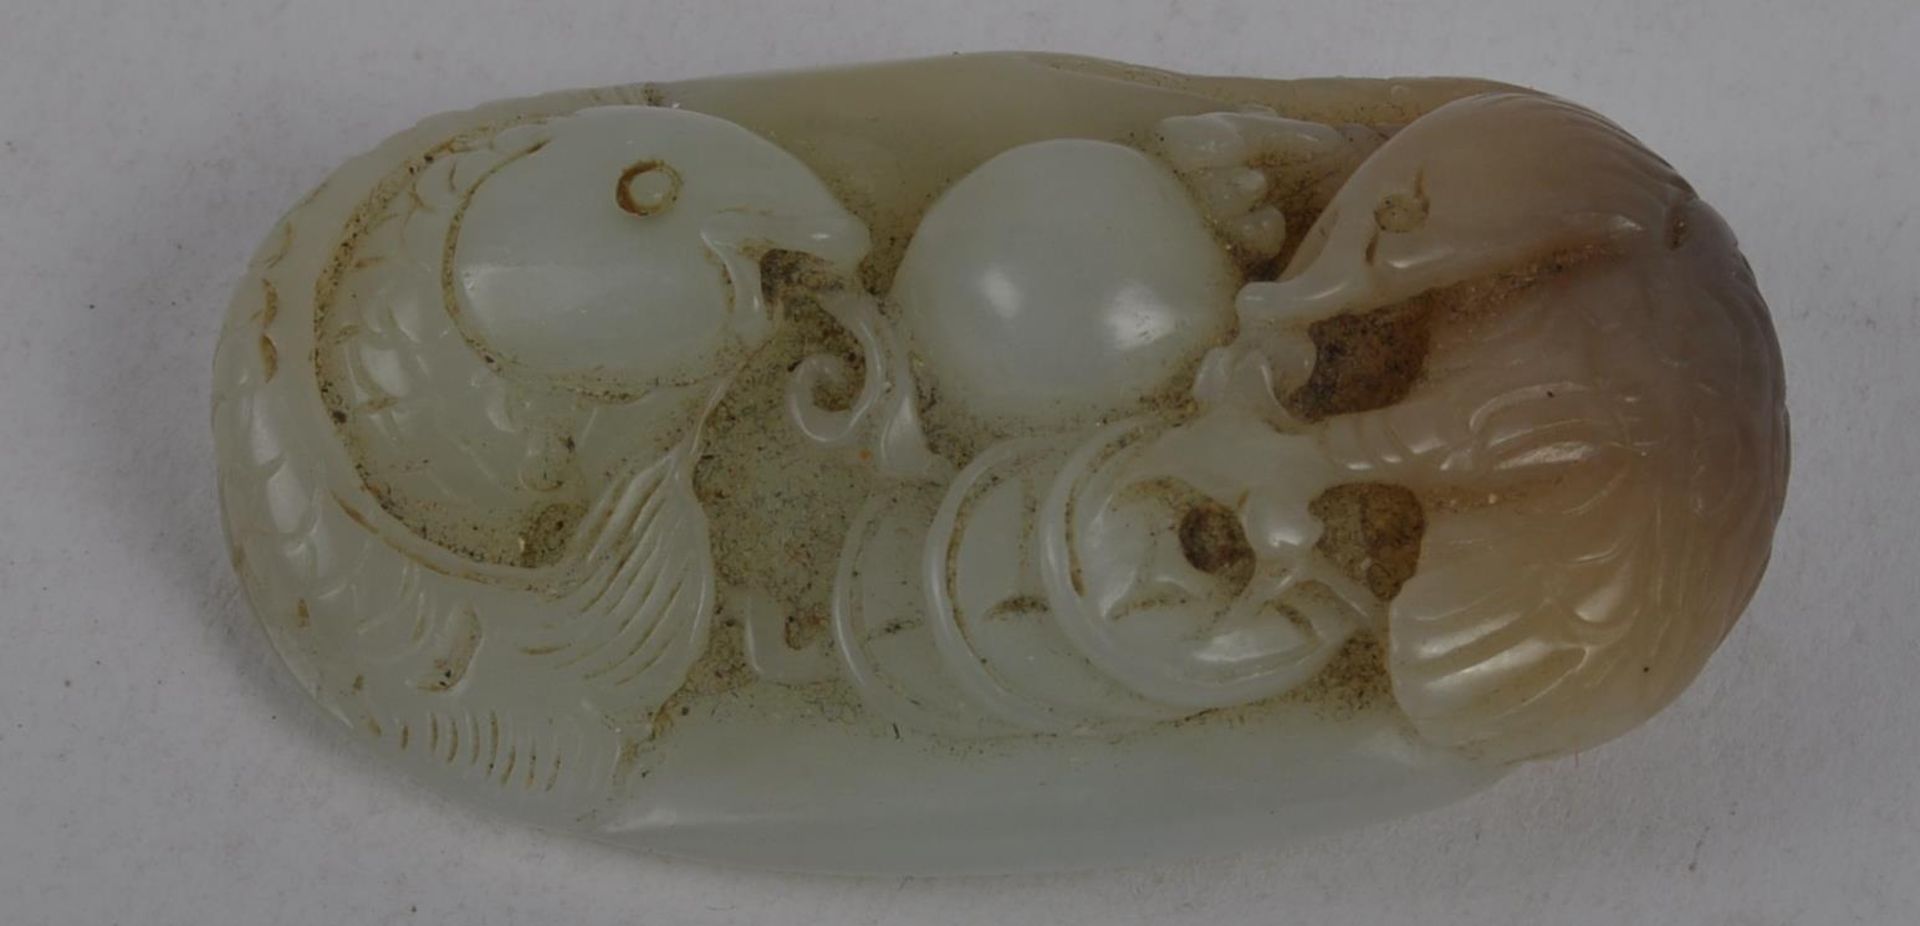 CHINESE CARVED JADE PANEL DEPICTING FISH, MONEY & BIRD - Image 3 of 4